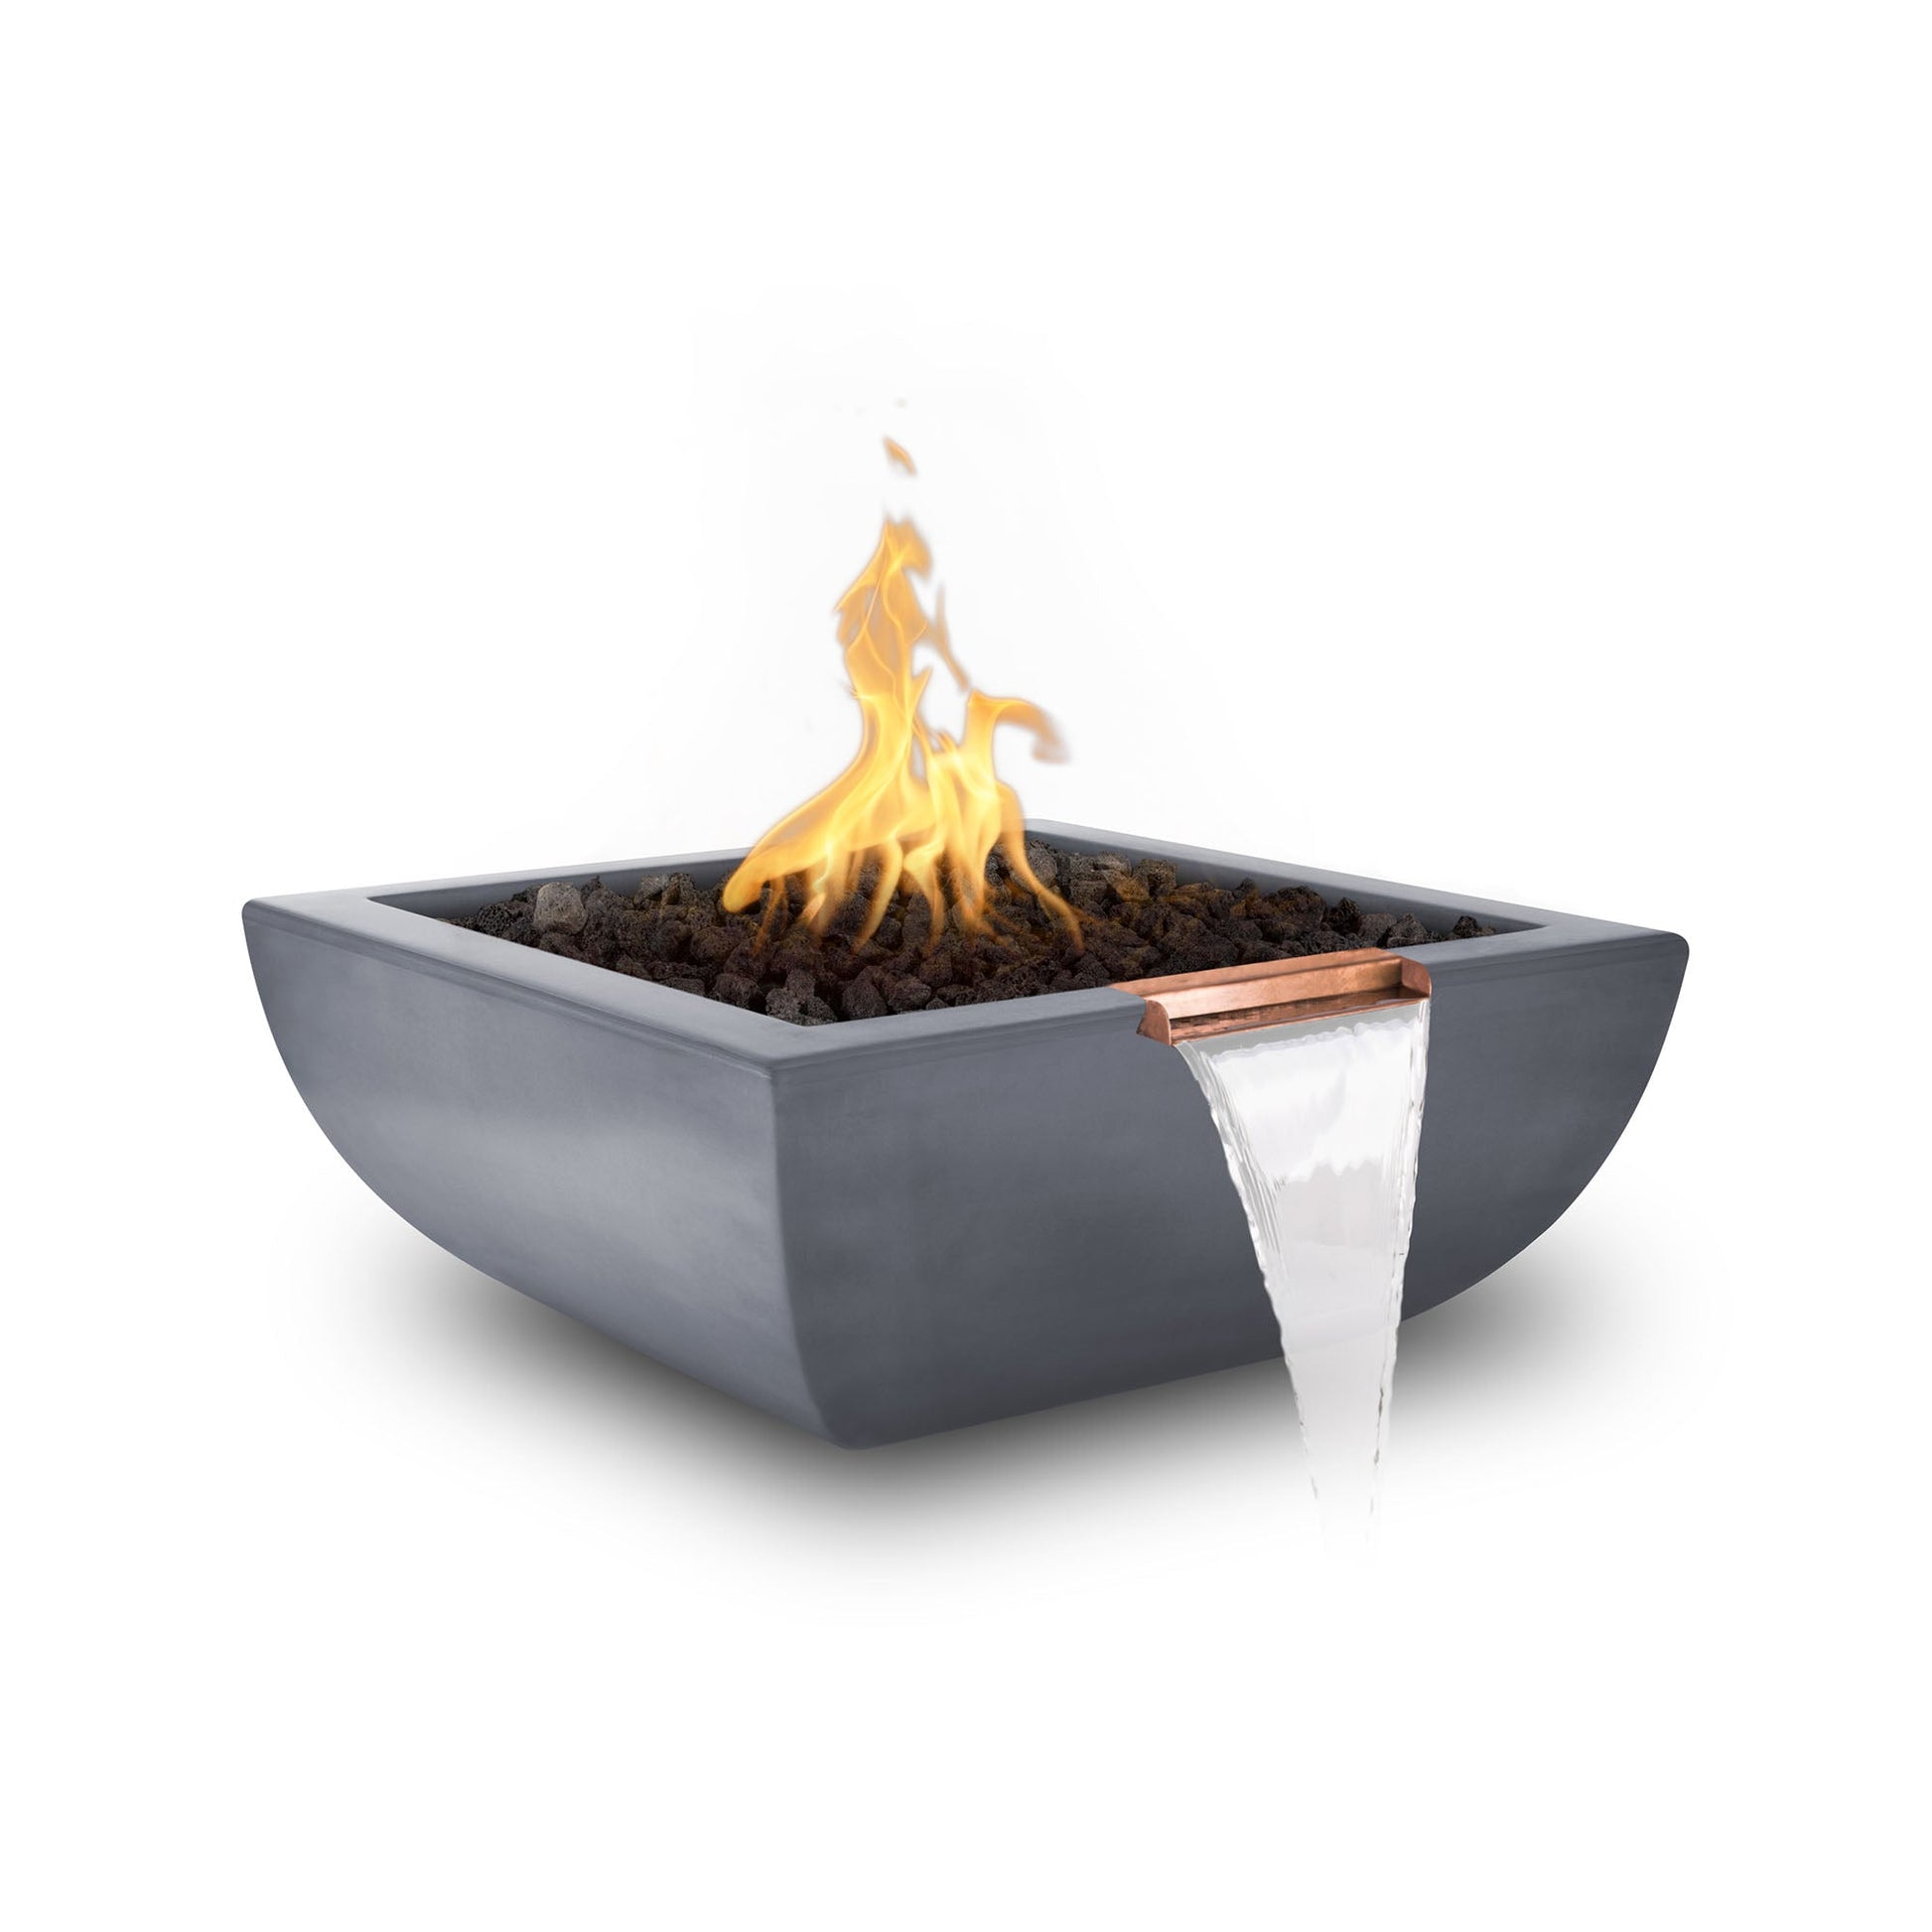 The Outdoor Plus Square Avalon 36" Metallic Bronze GFRC Concrete Natural Gas Fire & Water Bowl with Match Lit with Flame Sense Ignition